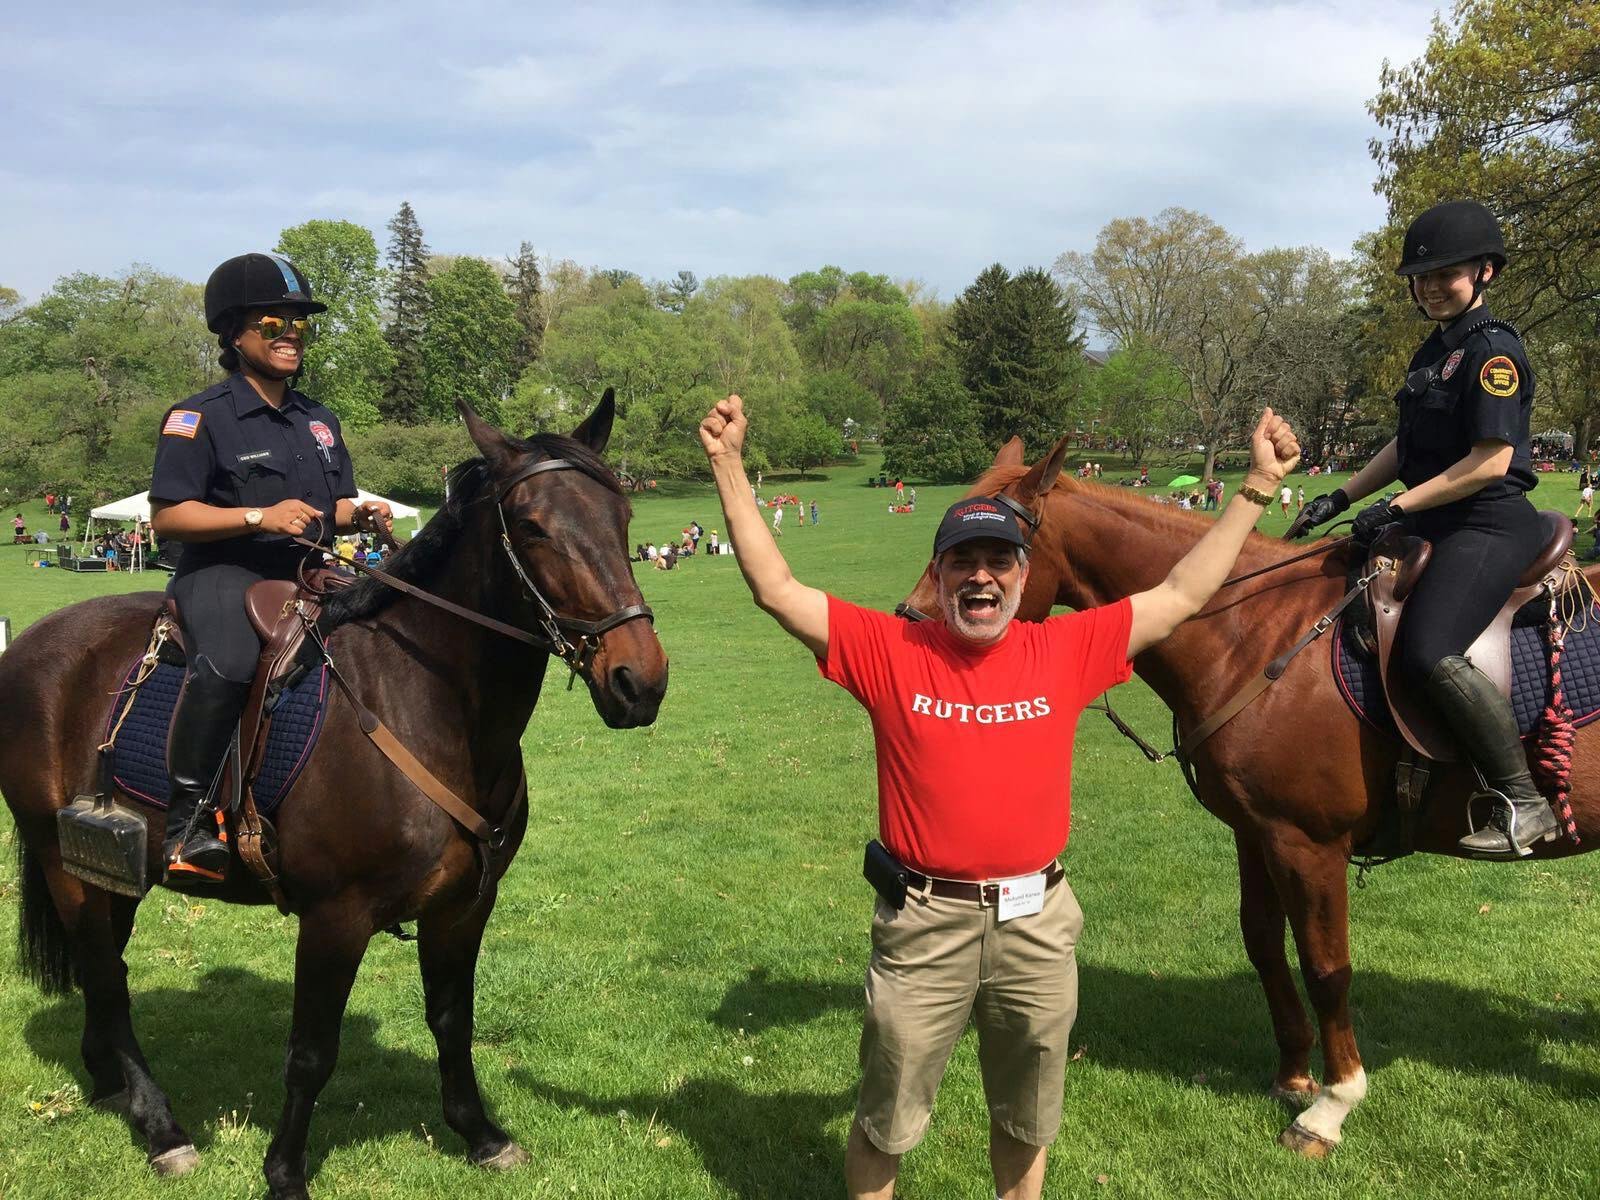 MVK WIth Rutgers Mounted Patrol 2019